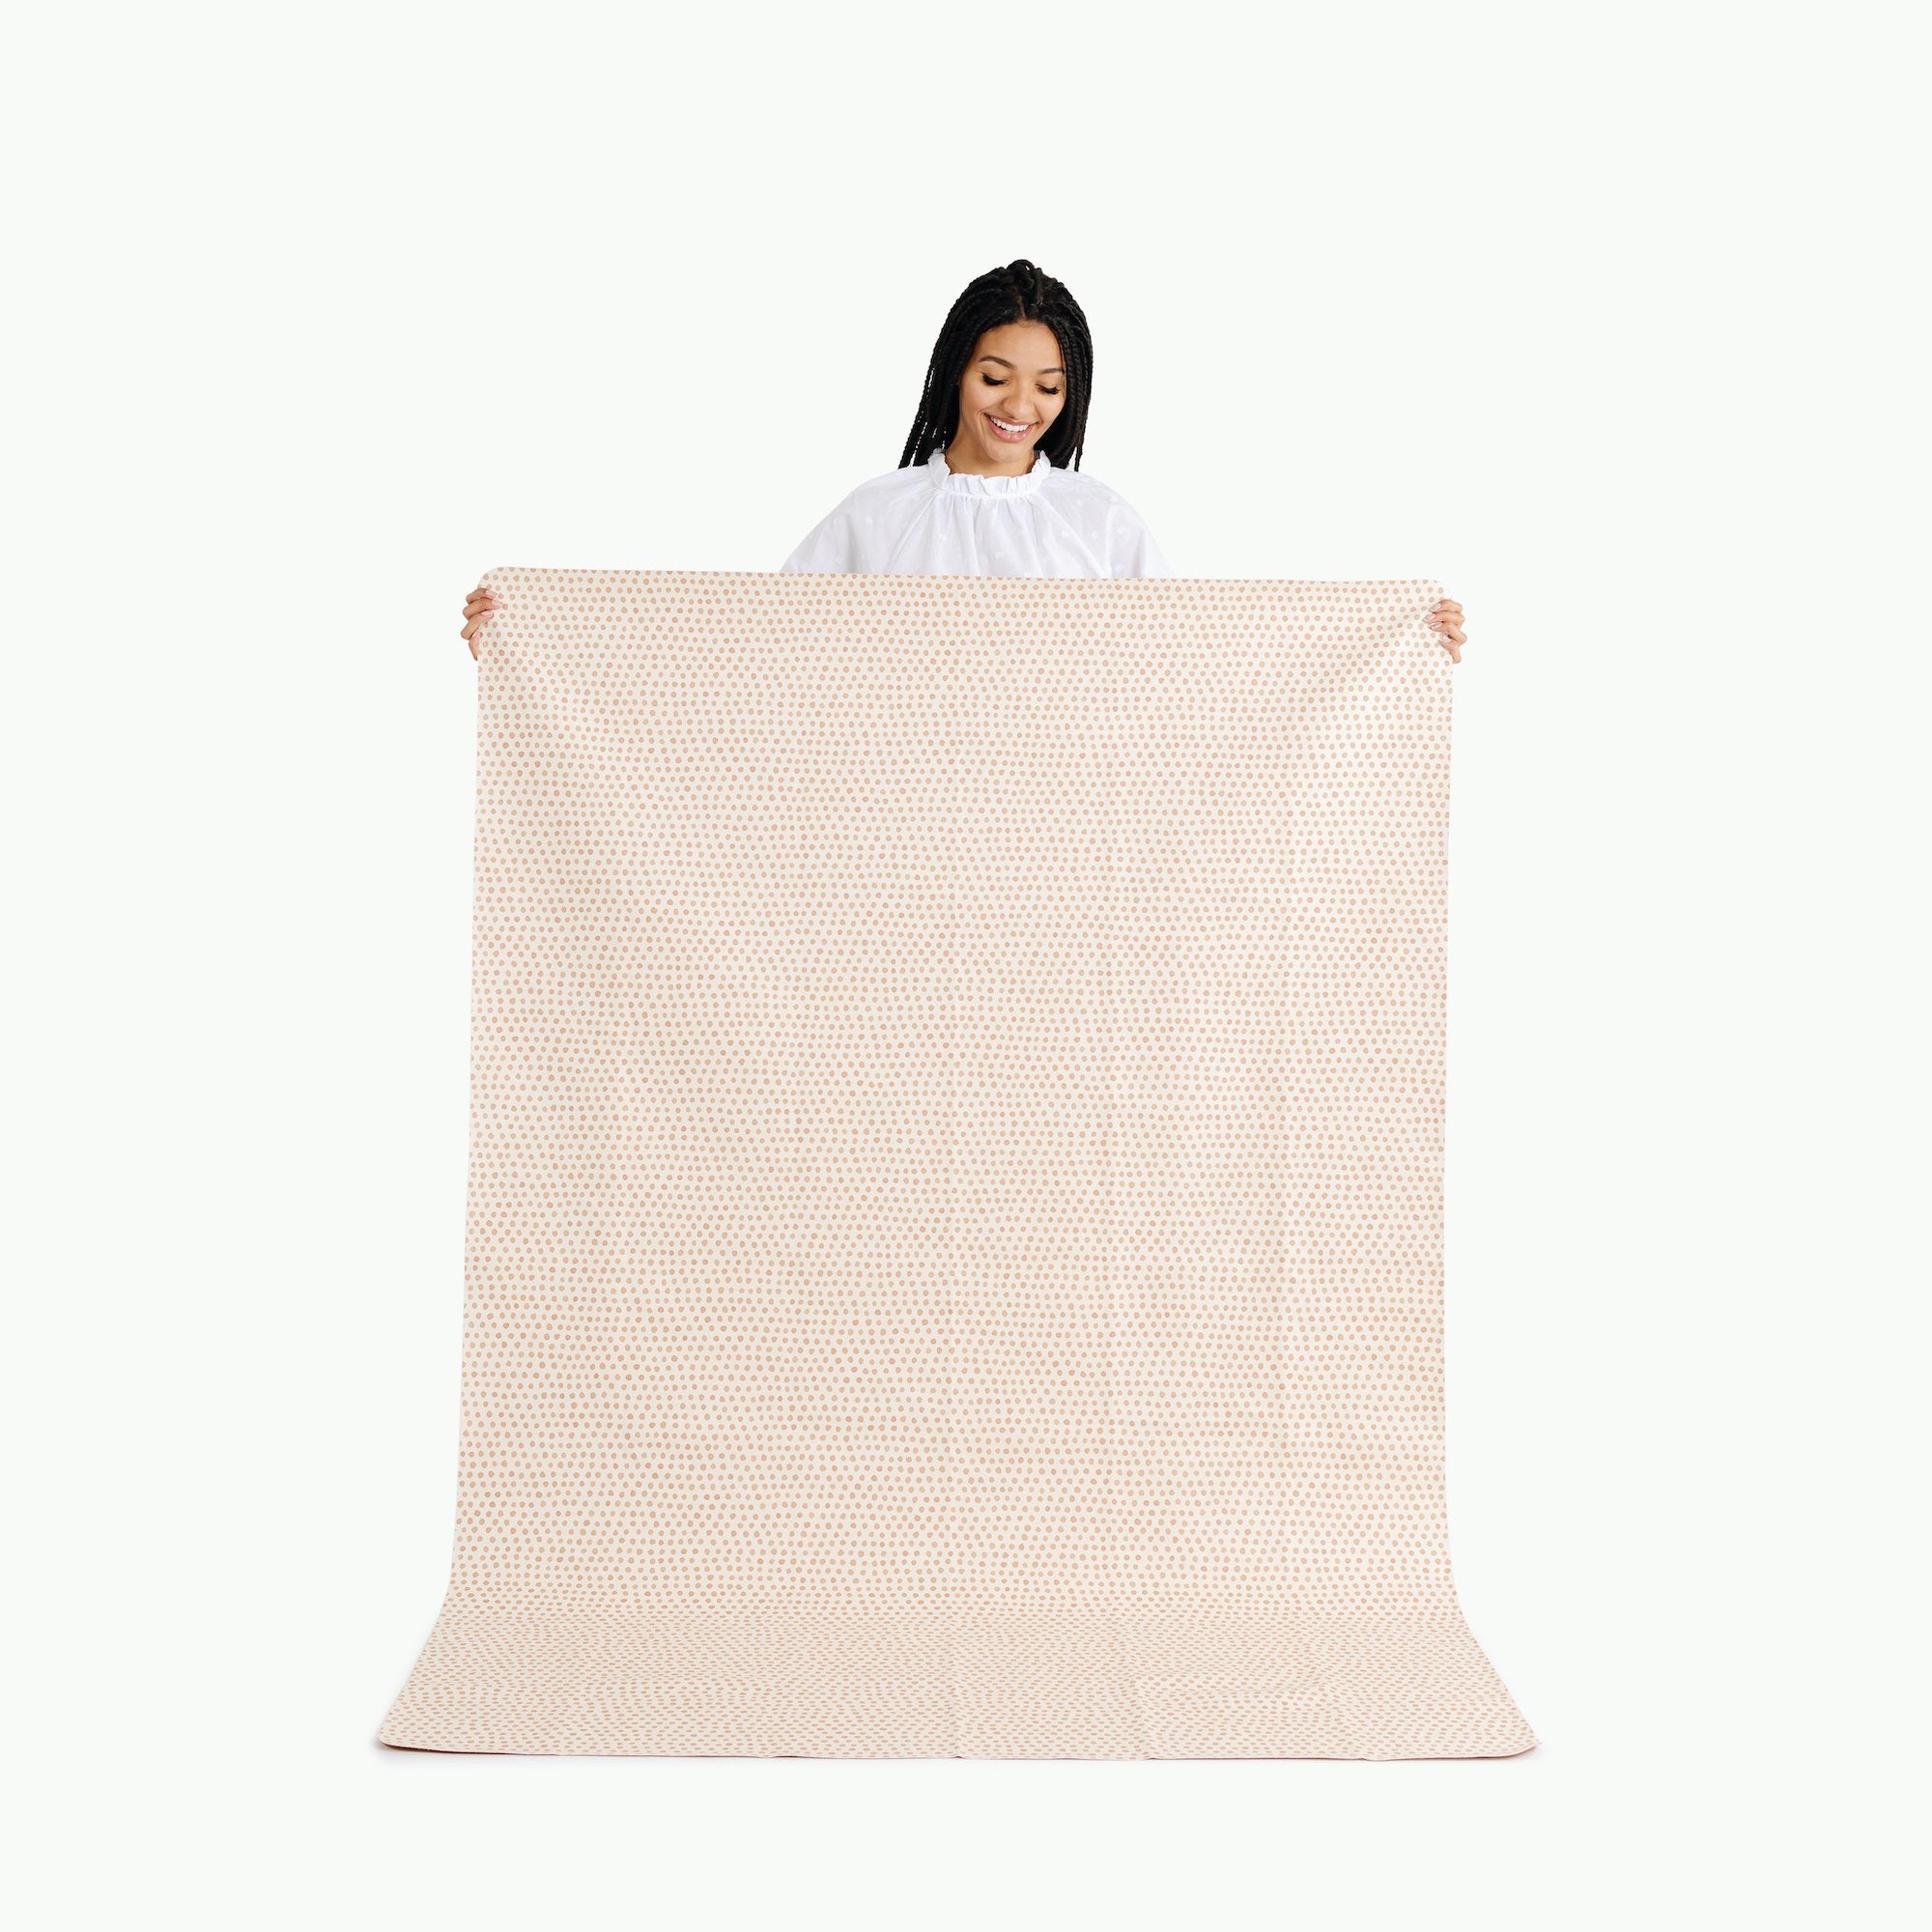 Pebble (on sale) / 6 Foot@woman holding 6 foot pebble tablecloth